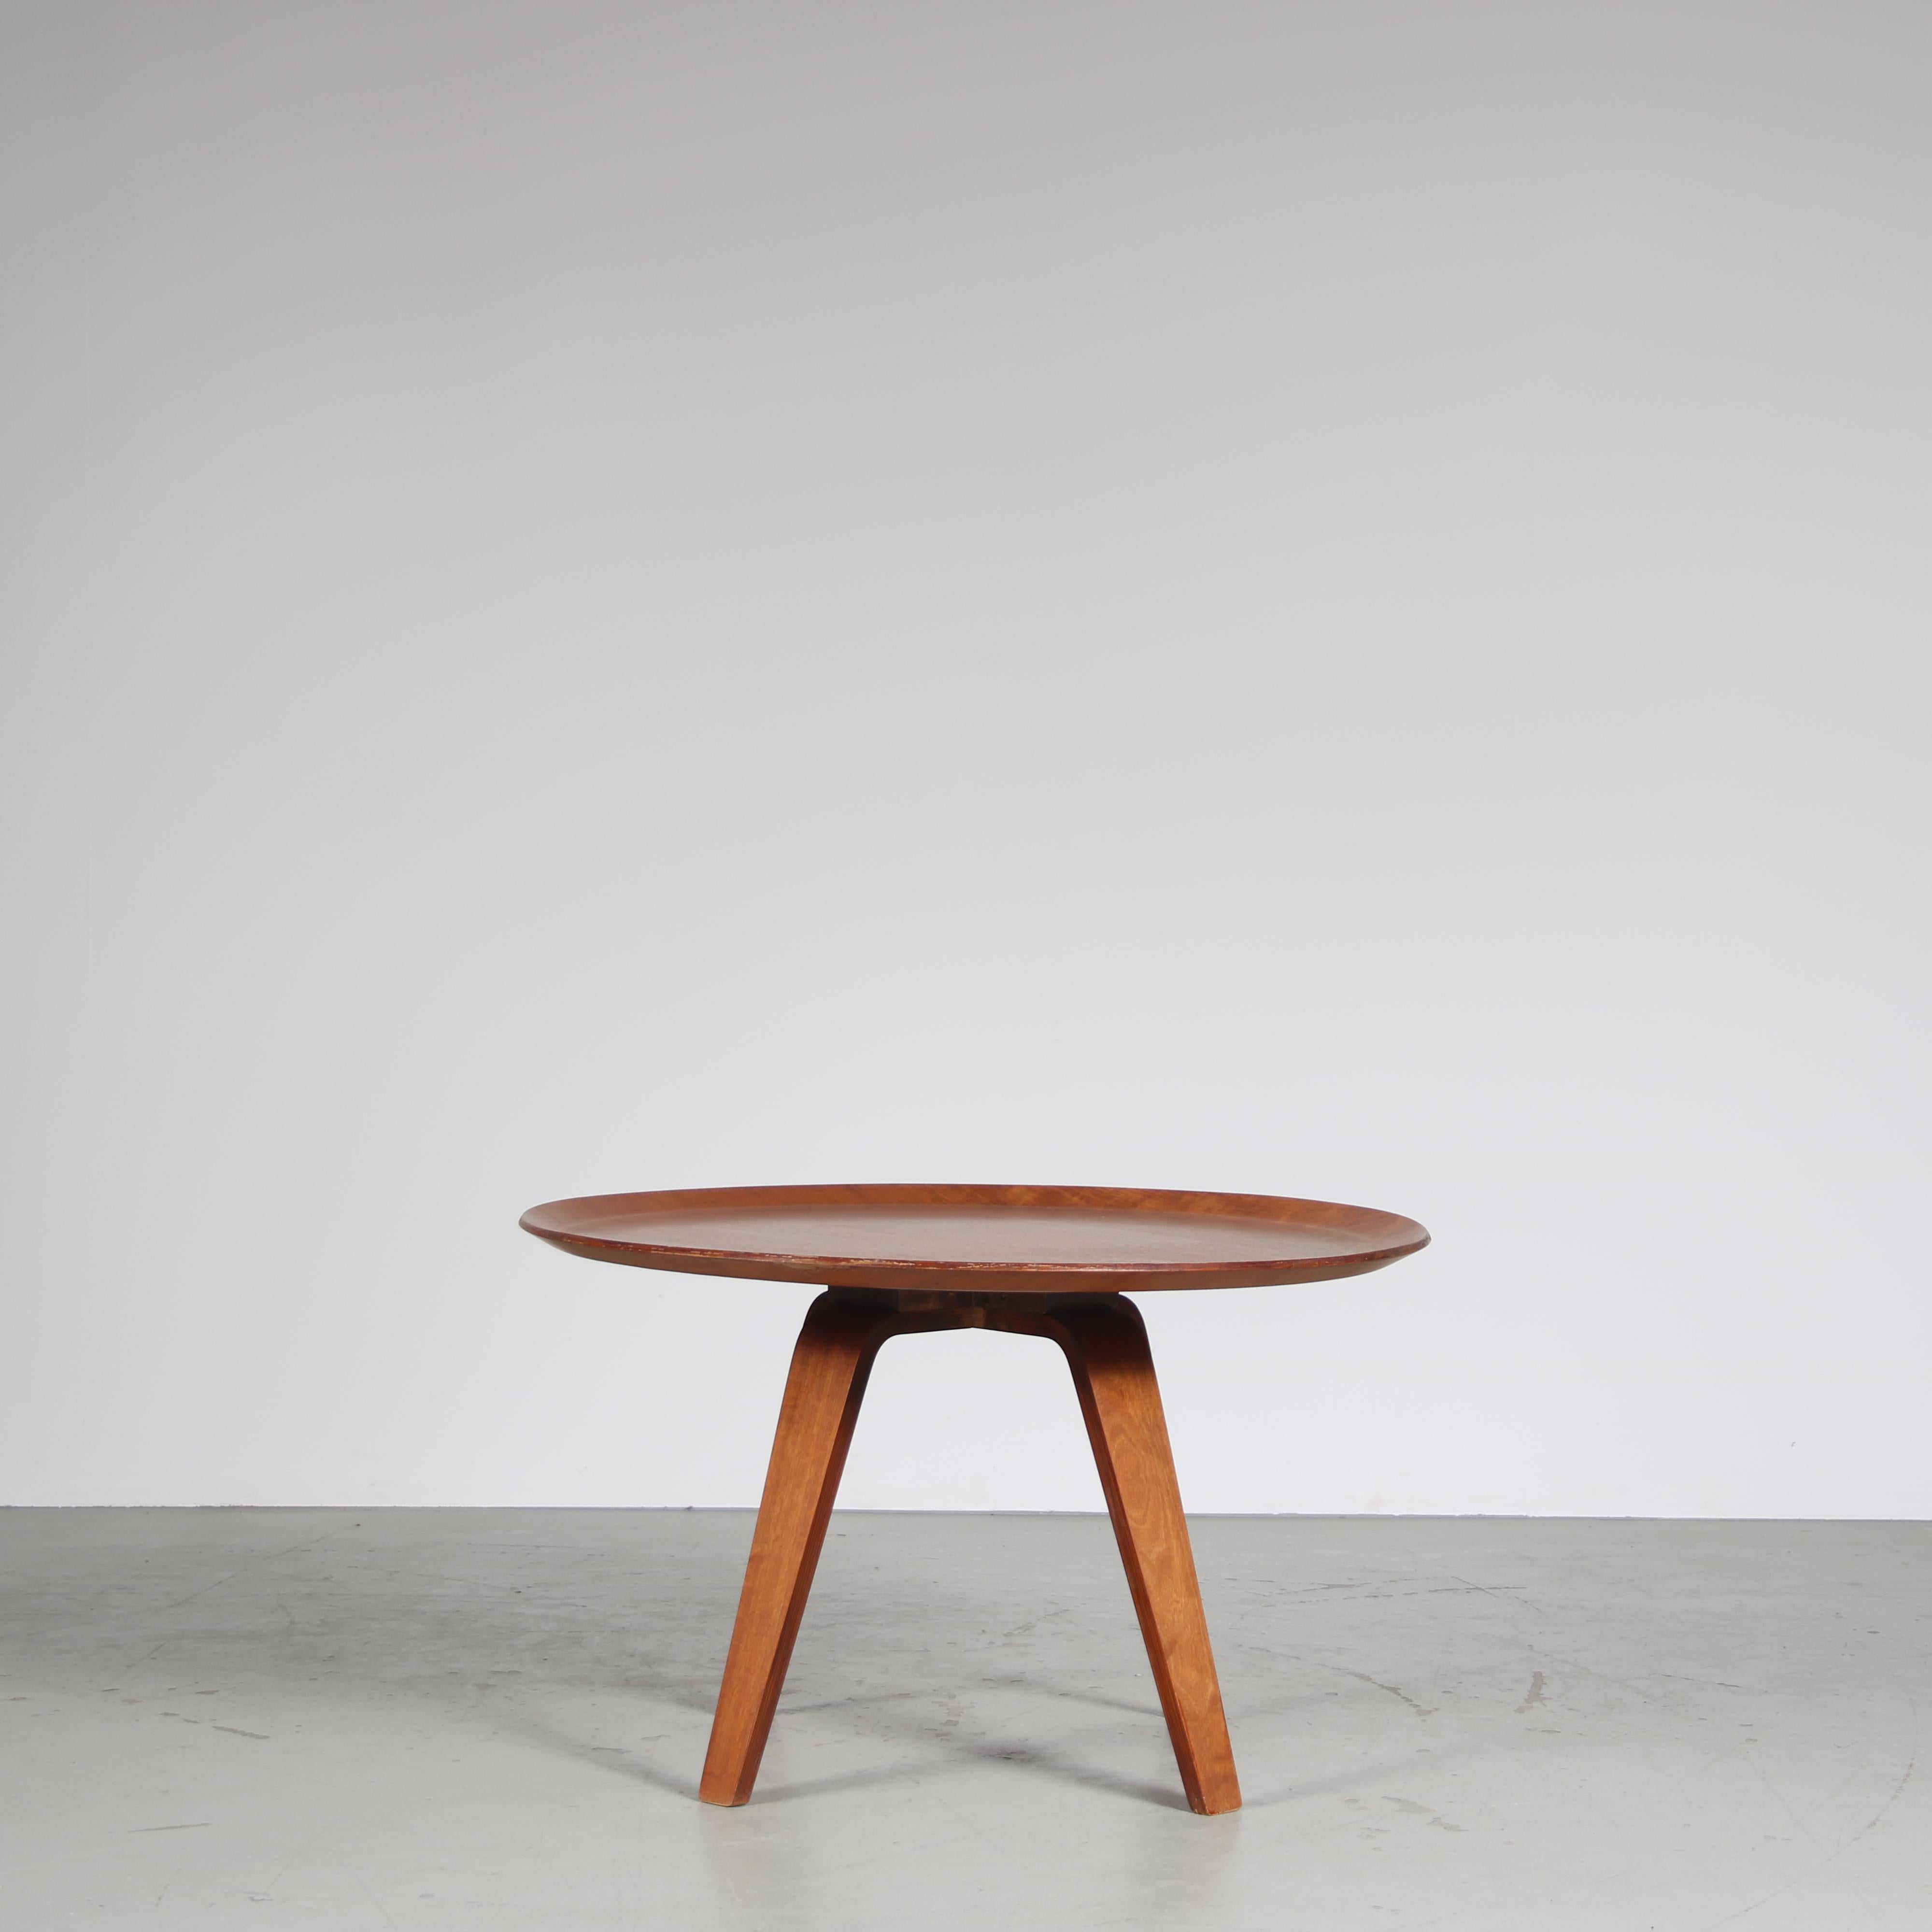 Wood Cor Alons Coffee Table for De Boer Gouda, Netherlands 1950 For Sale